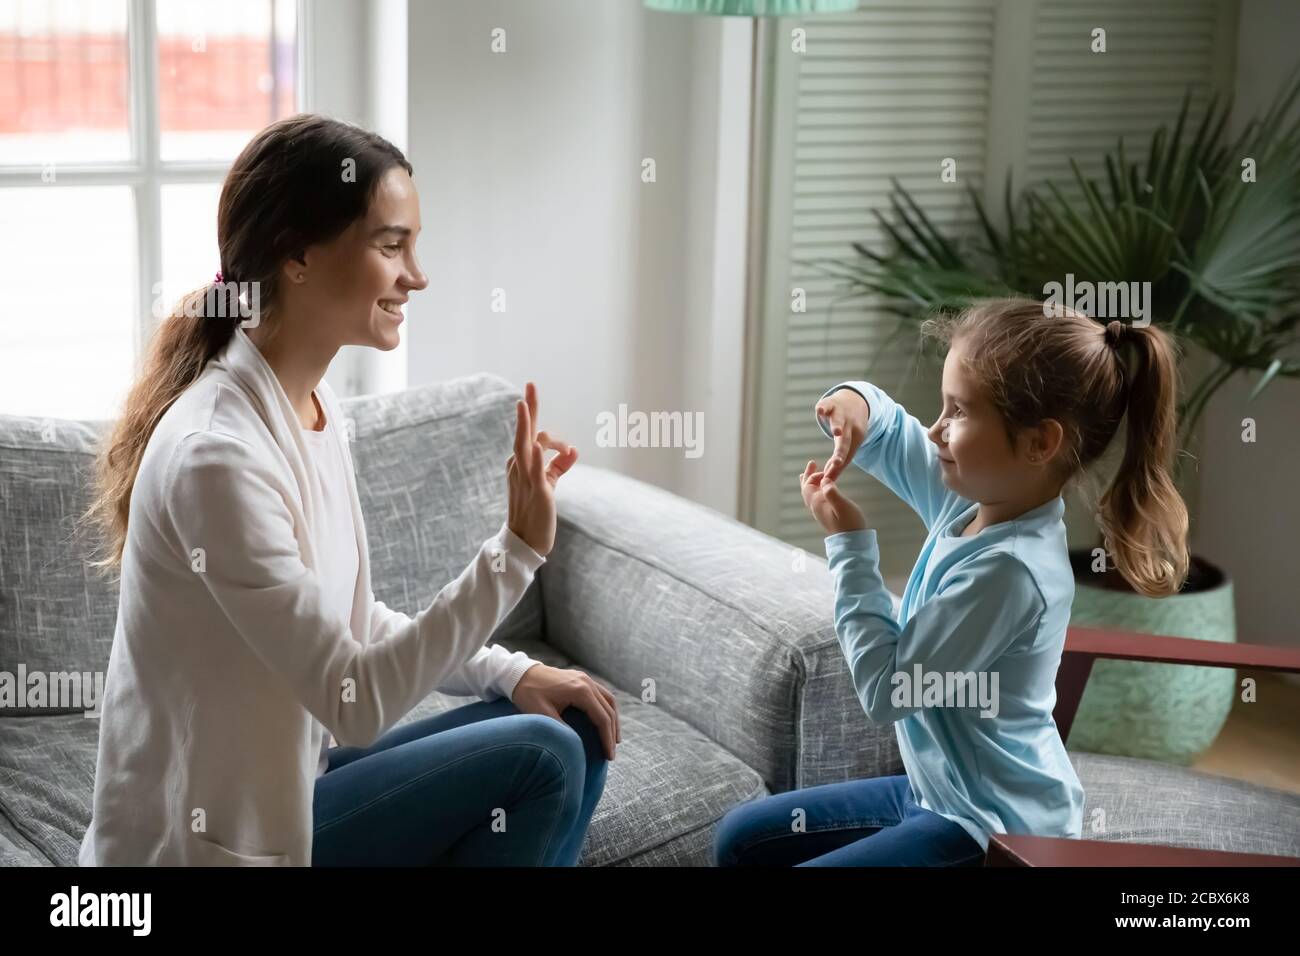 Smiling young woman teaching little cute girl sign language. Stock Photo